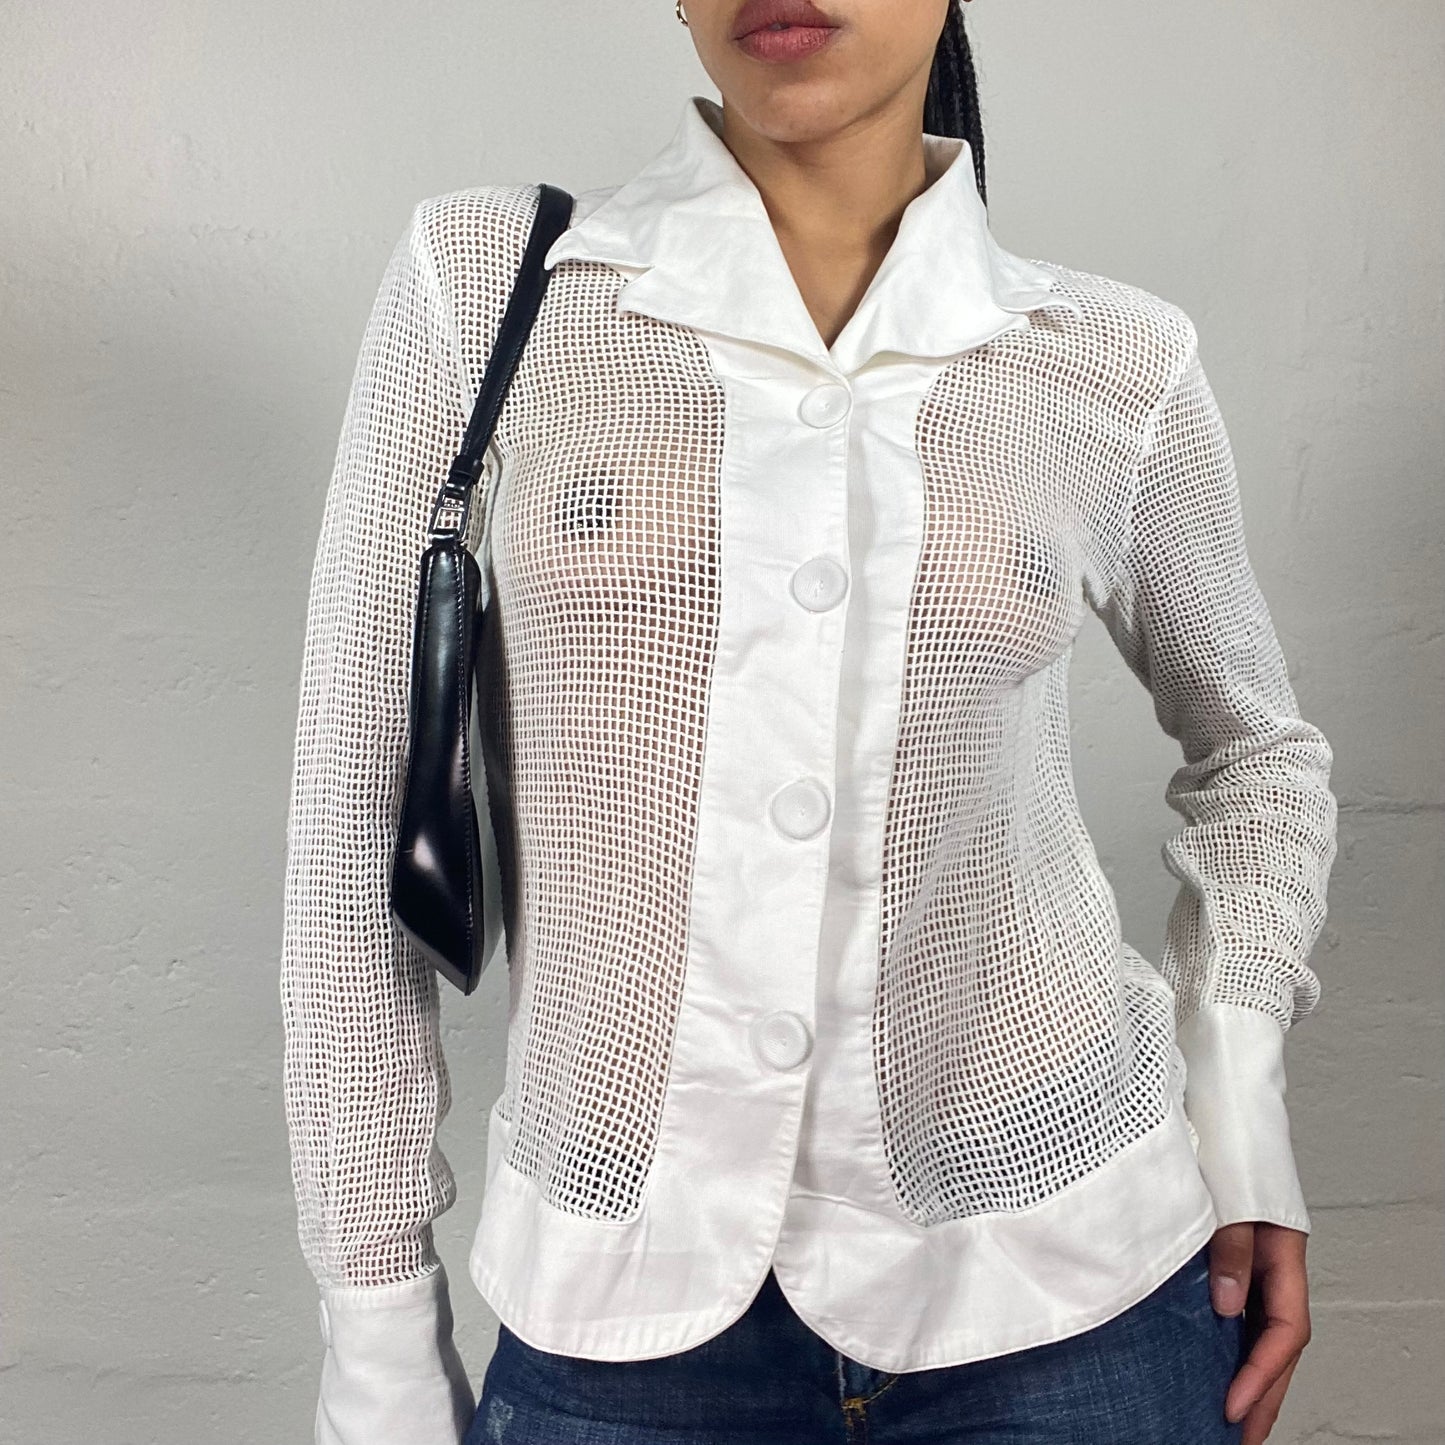 Vintage 2000's Soft Girl White Net Effect Longsleeve Button Up Blazer Style Collared Top (M)